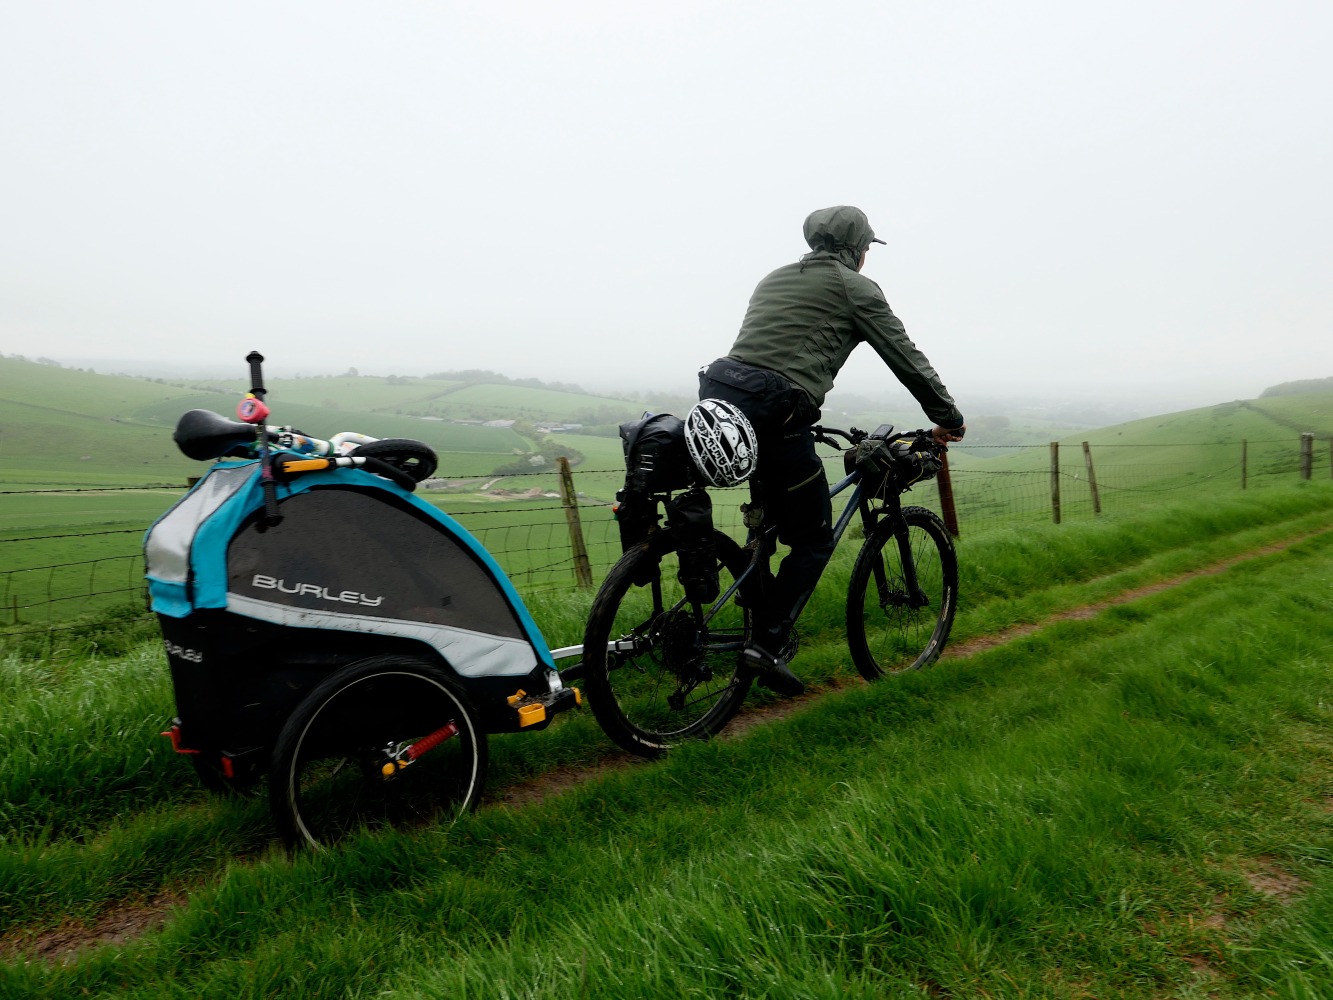 dad bikepacking on a foggy day with his trailer